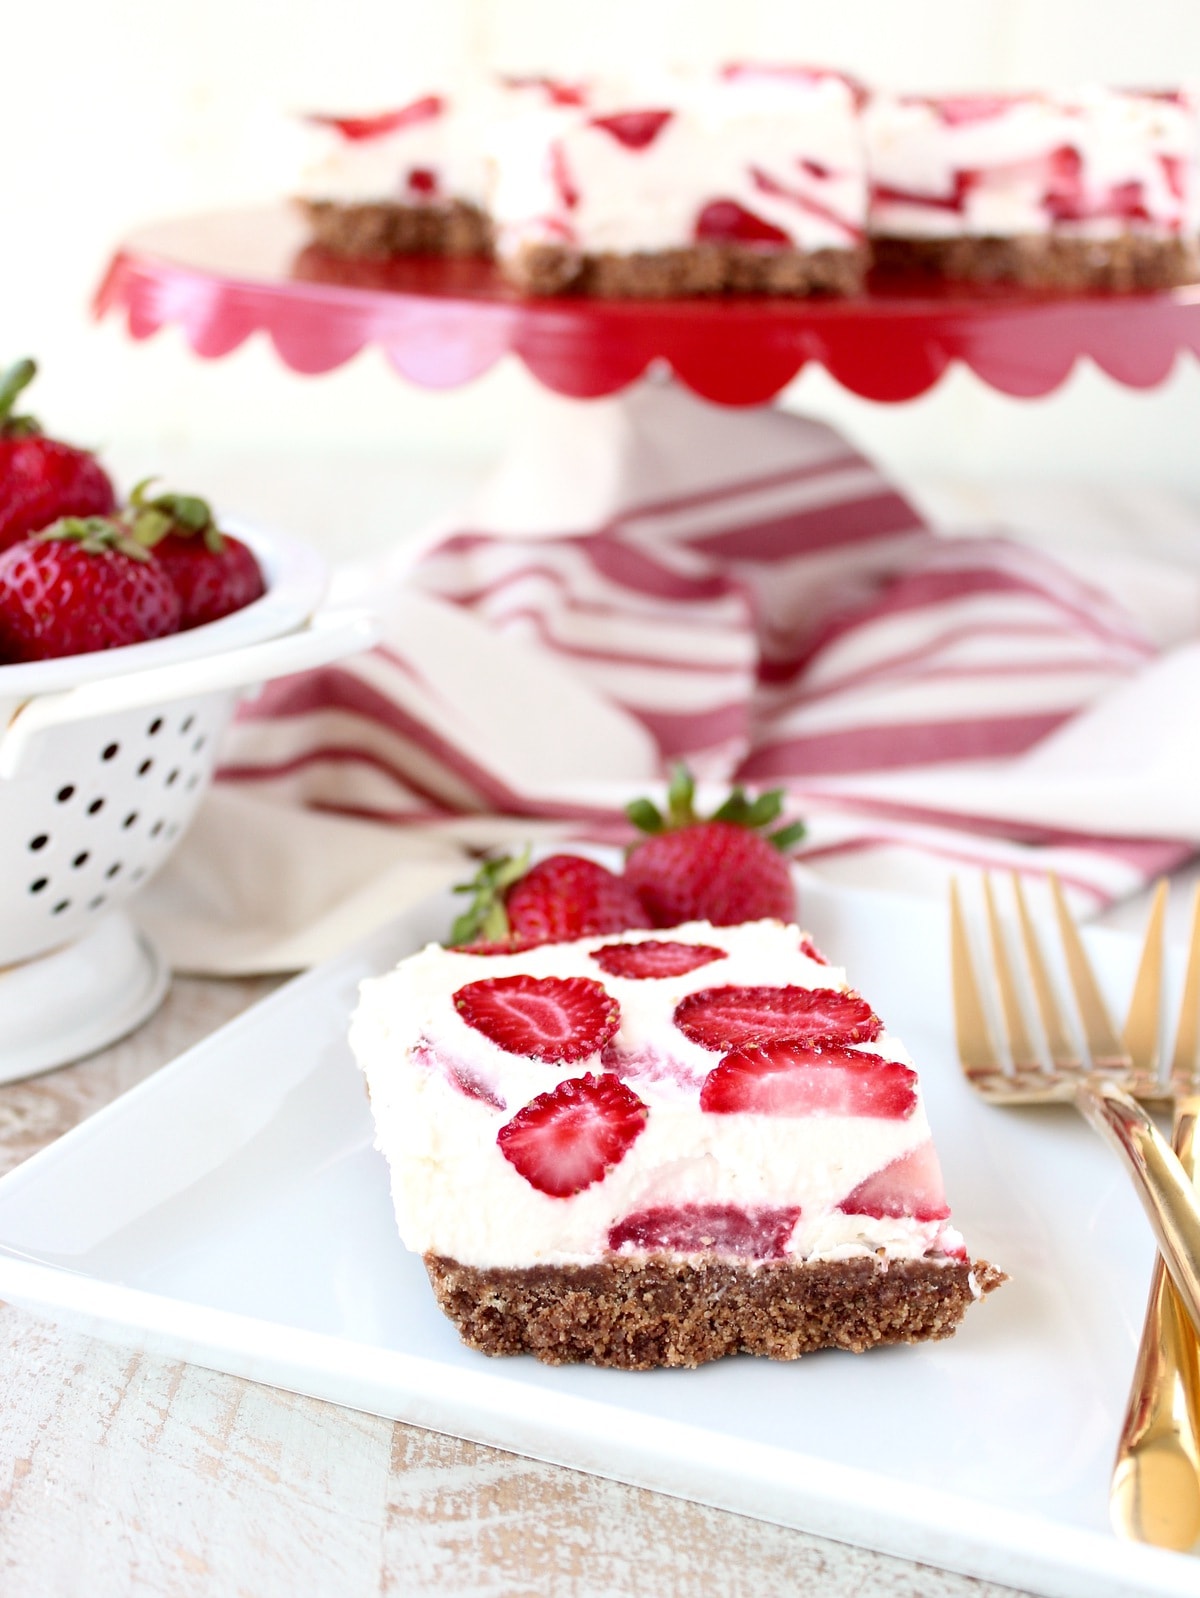 strawberry cheesecake bar on white plate with gold forks